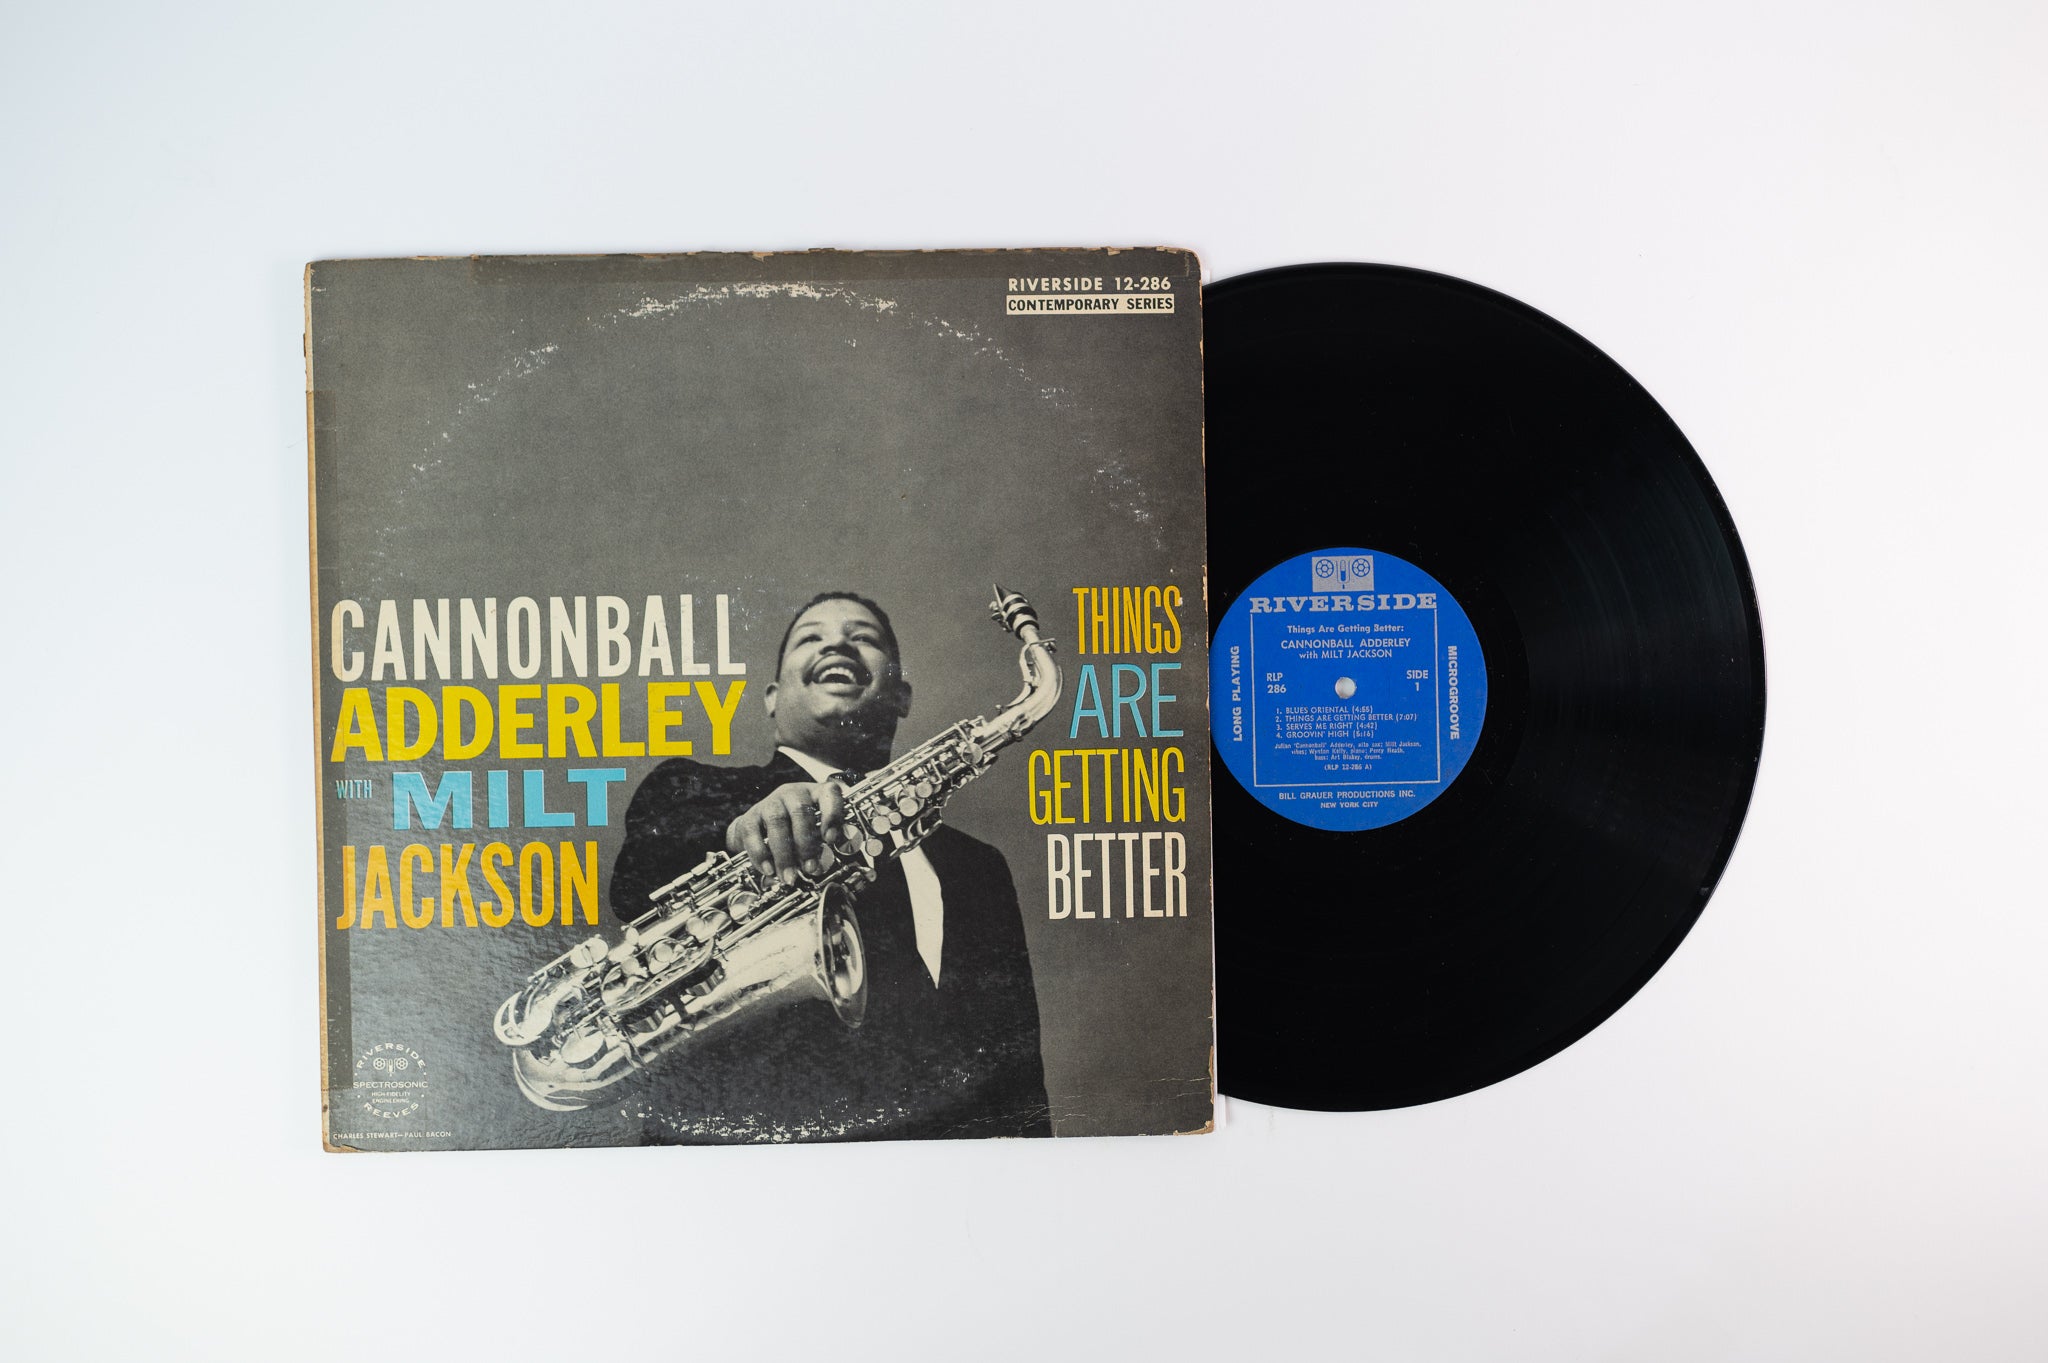 Cannonball Adderley - Things Are Getting Better on Riverside Mono